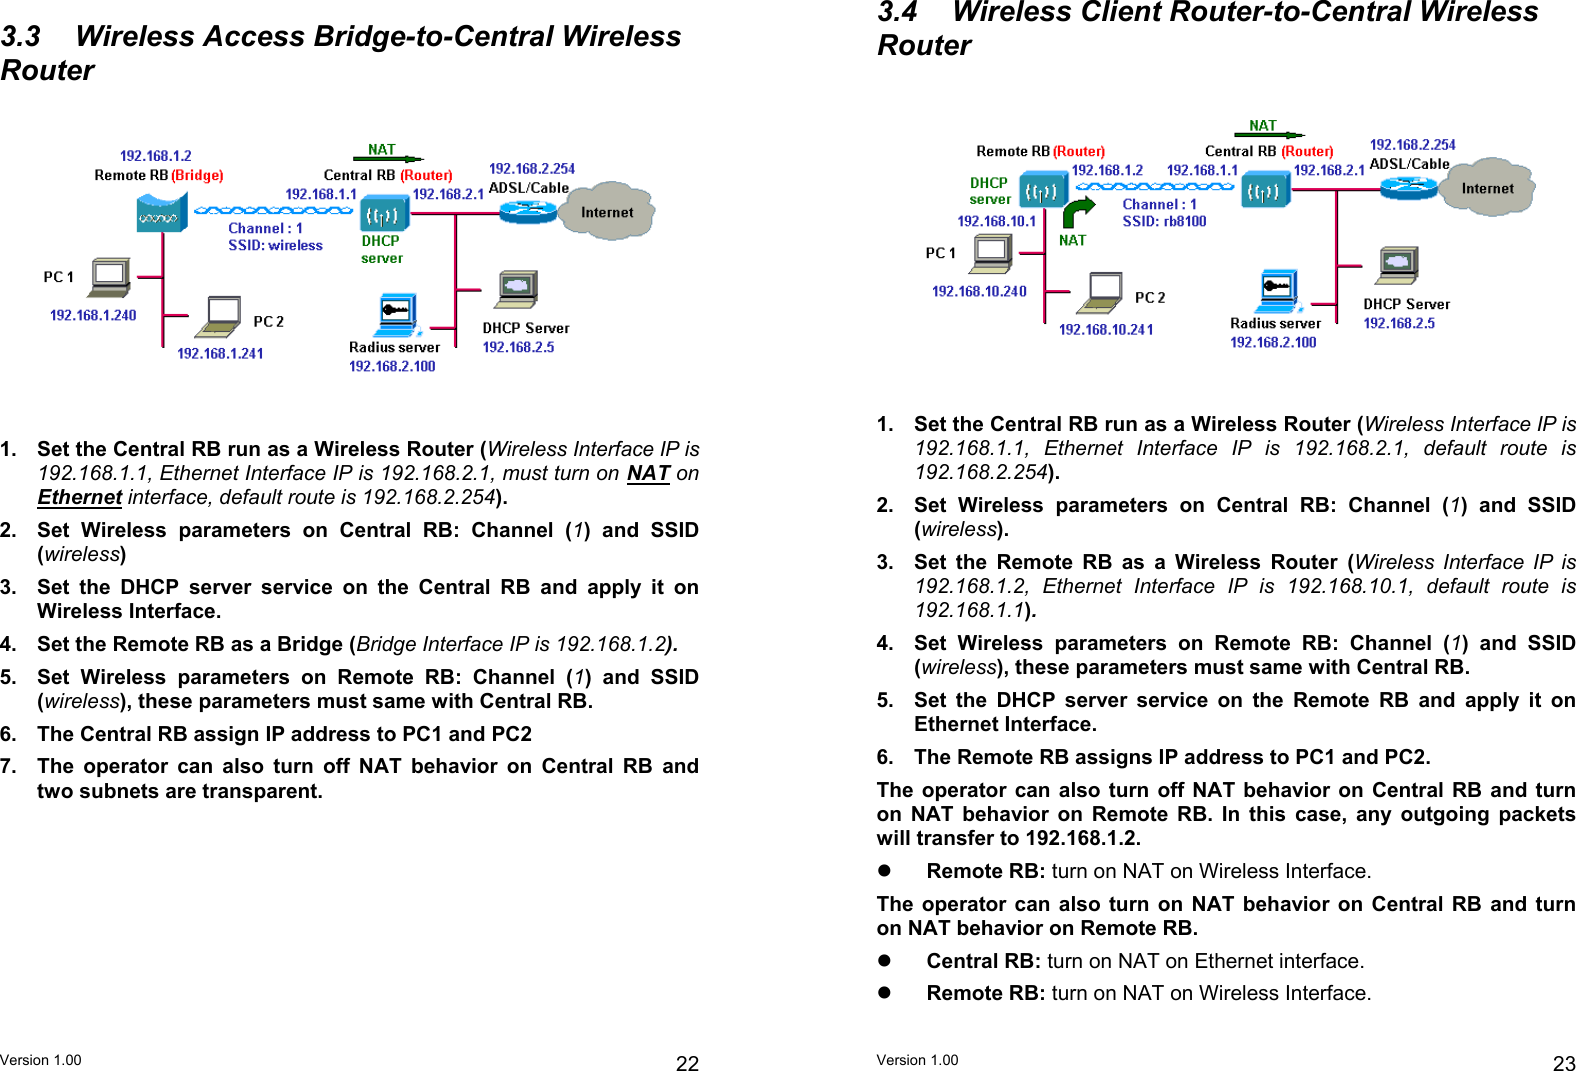 3.4  Wireless Client Router-to-Central Wireless Router 3.3  Wireless Access Bridge-to-Central Wireless Router  1.  Set the Central RB run as a Wireless Router (Wireless Interface IP is 192.168.1.1, Ethernet Interface IP is 192.168.2.1, default route is 192.168.2.254).  1.  Set the Central RB run as a Wireless Router (Wireless Interface IP is 192.168.1.1, Ethernet Interface IP is 192.168.2.1, must turn on NAT on Ethernet interface, default route is 192.168.2.254).  2.  Set Wireless parameters on Central RB: Channel (1) and SSID (wireless). 2.  Set Wireless parameters on Central RB: Channel (1) and SSID (wireless)  3.  Set the Remote RB as a Wireless Router (Wireless Interface IP is 192.168.1.2, Ethernet Interface IP is 192.168.10.1, default route is 192.168.1.1).  3.  Set the DHCP server service on the Central RB and apply it on Wireless Interface. 4.  Set Wireless parameters on Remote RB: Channel (1) and SSID (wireless), these parameters must same with Central RB. 4.  Set the Remote RB as a Bridge (Bridge Interface IP is 192.168.1.2).  5.  Set Wireless parameters on Remote RB: Channel (1) and SSID (wireless), these parameters must same with Central RB.  5.  Set the DHCP server service on the Remote RB and apply it on Ethernet Interface. 6.  The Central RB assign IP address to PC1 and PC2 6.  The Remote RB assigns IP address to PC1 and PC2. 7.  The operator can also turn off NAT behavior on Central RB and two subnets are transparent.  The operator can also turn off NAT behavior on Central RB and turn on NAT behavior on Remote RB. In this case, any outgoing packets will transfer to 192.168.1.2.      Remote RB: turn on NAT on Wireless Interface.  The operator can also turn on NAT behavior on Central RB and turn on NAT behavior on Remote RB.     Central RB: turn on NAT on Ethernet interface.     Remote RB: turn on NAT on Wireless Interface. Version 1.00  22 Version 1.00  23